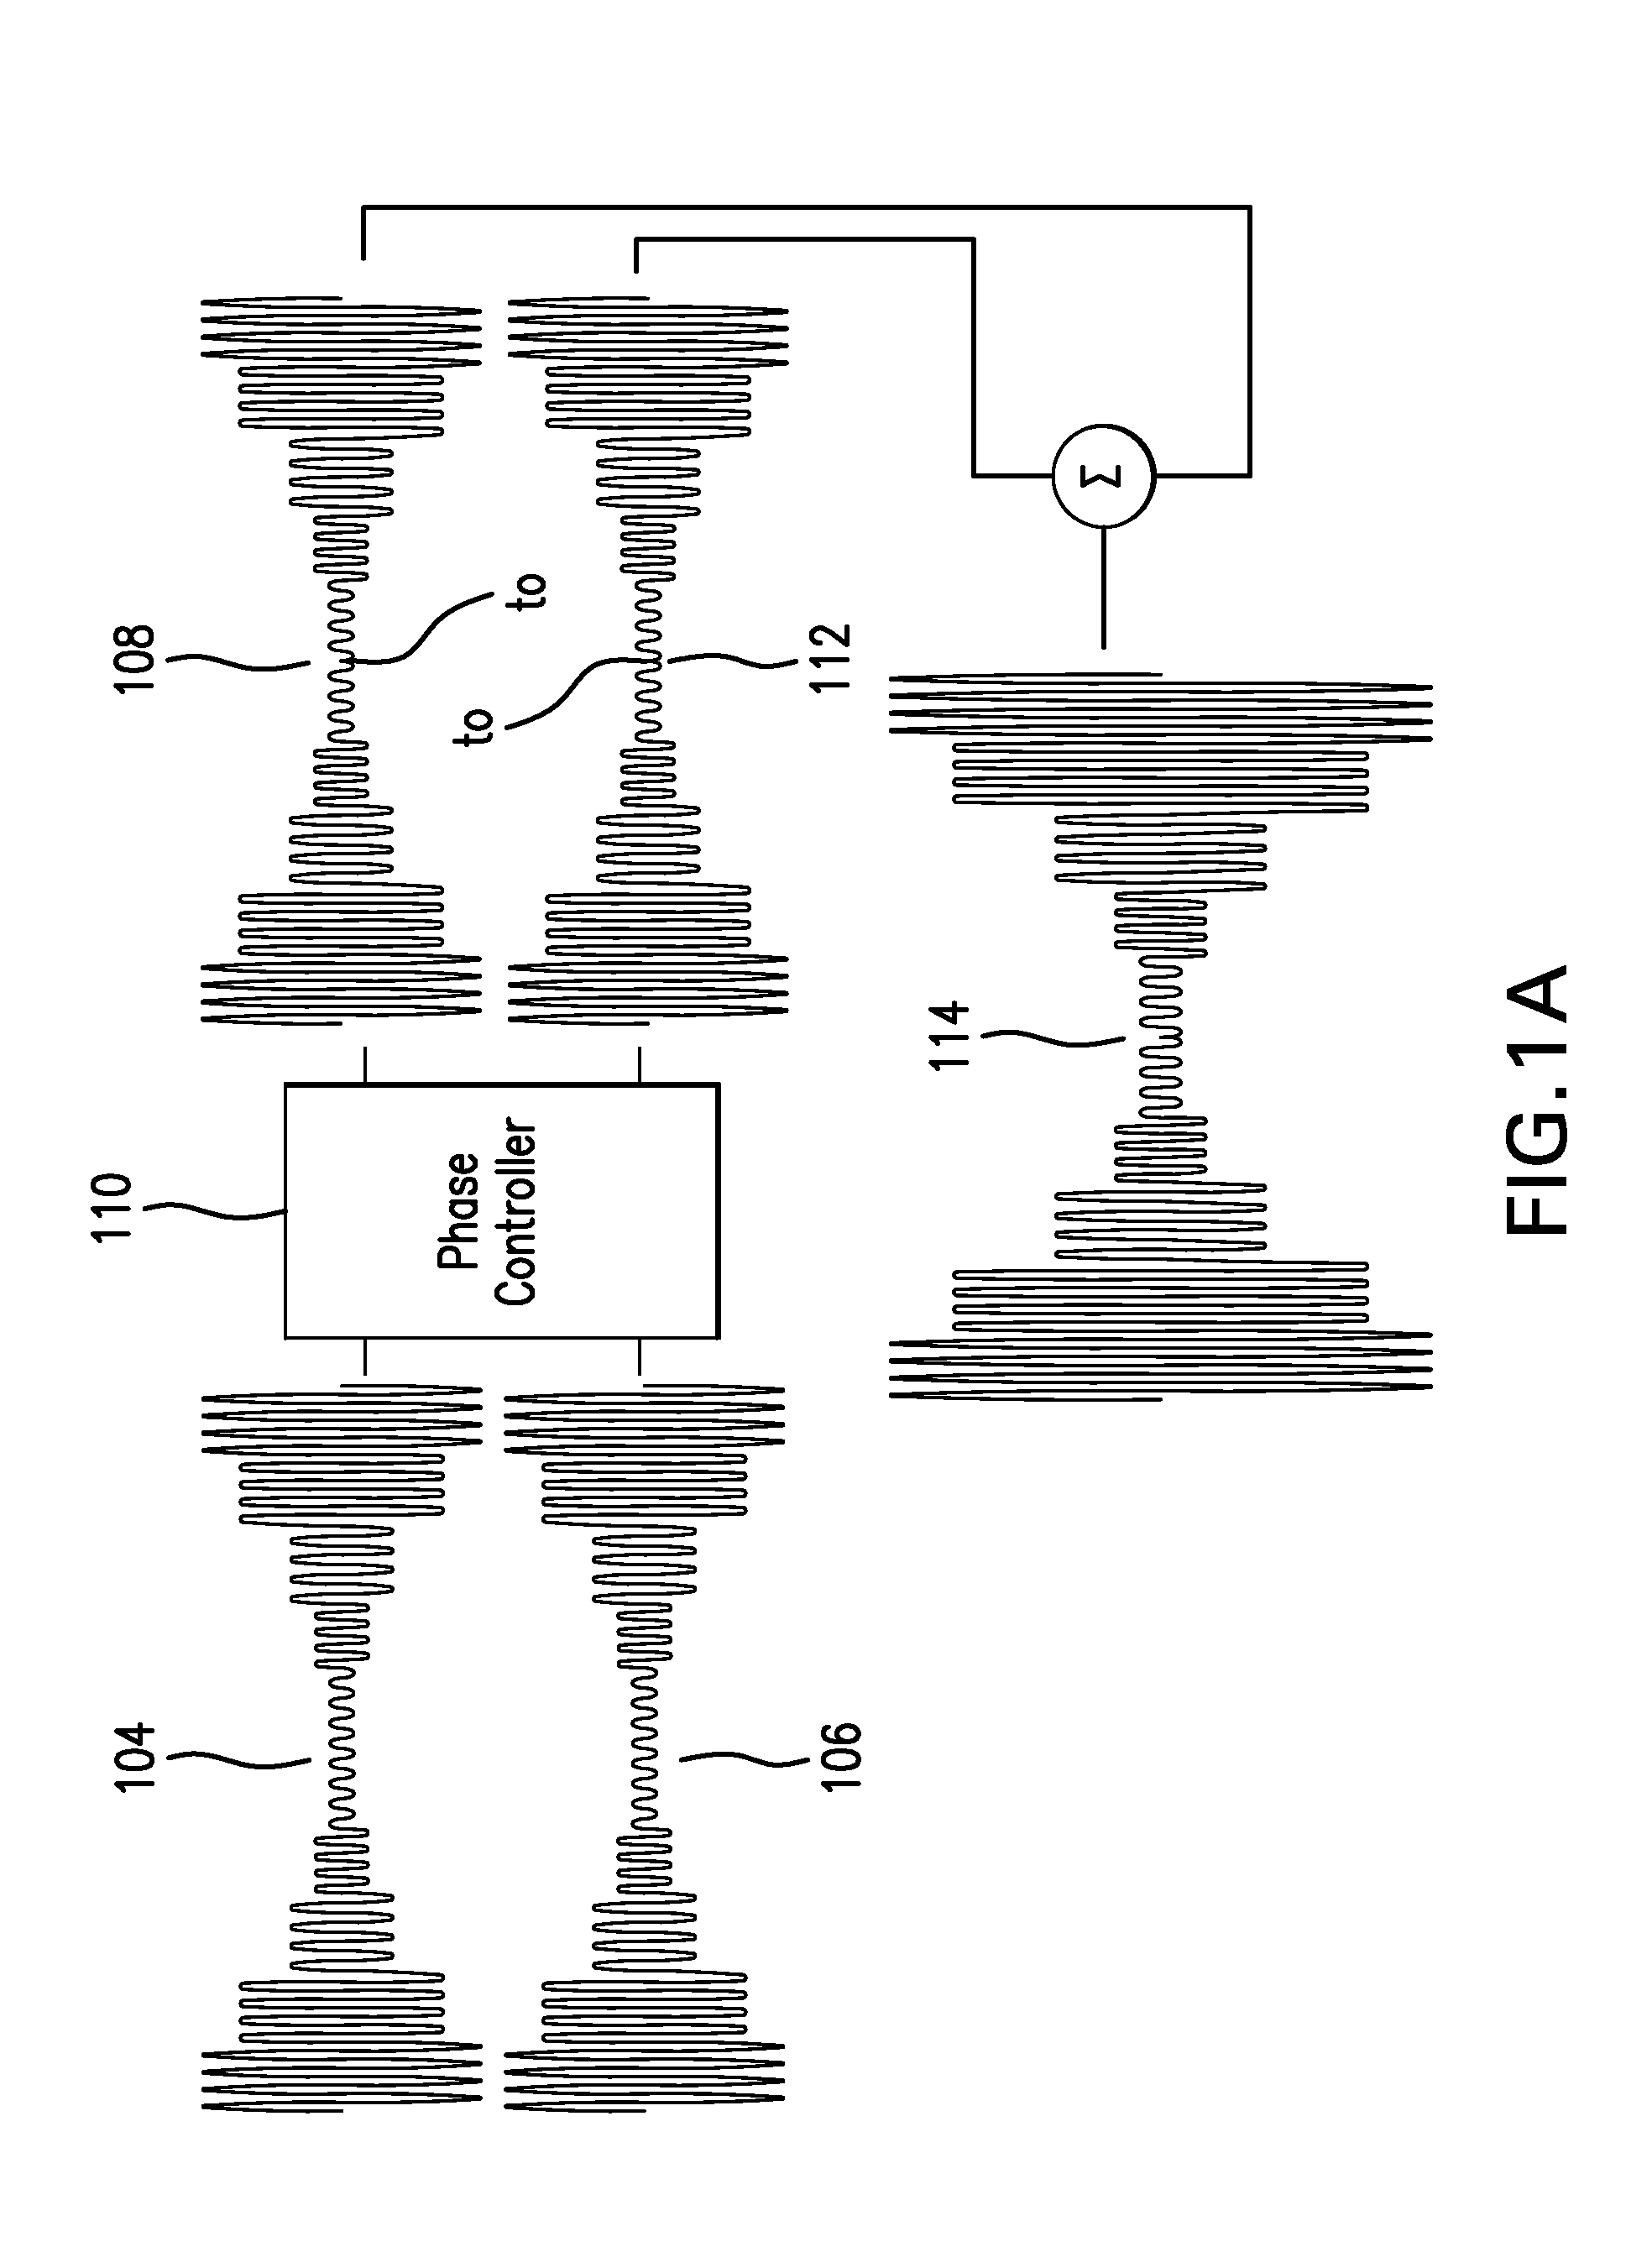 Systems and methods of RF power transmission, modulation, and amplification